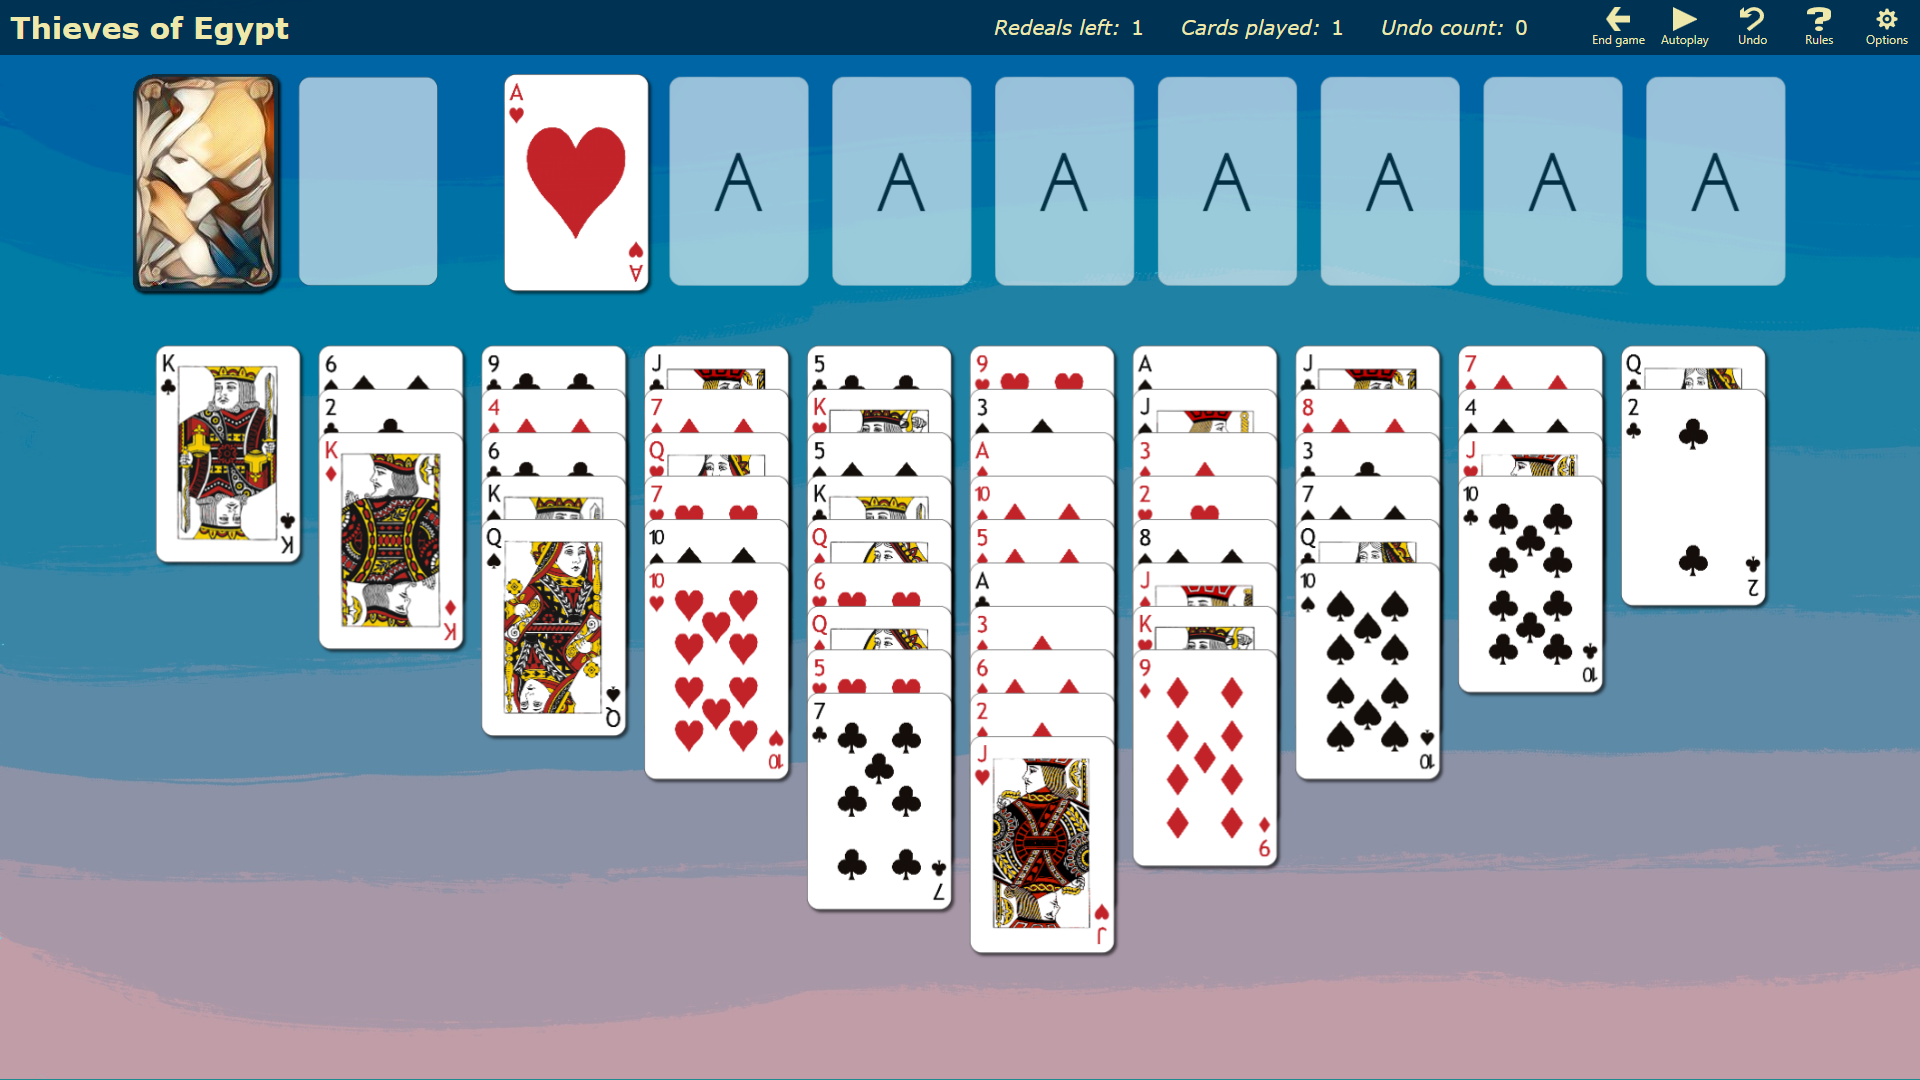 Klondike Solitaire Expedition